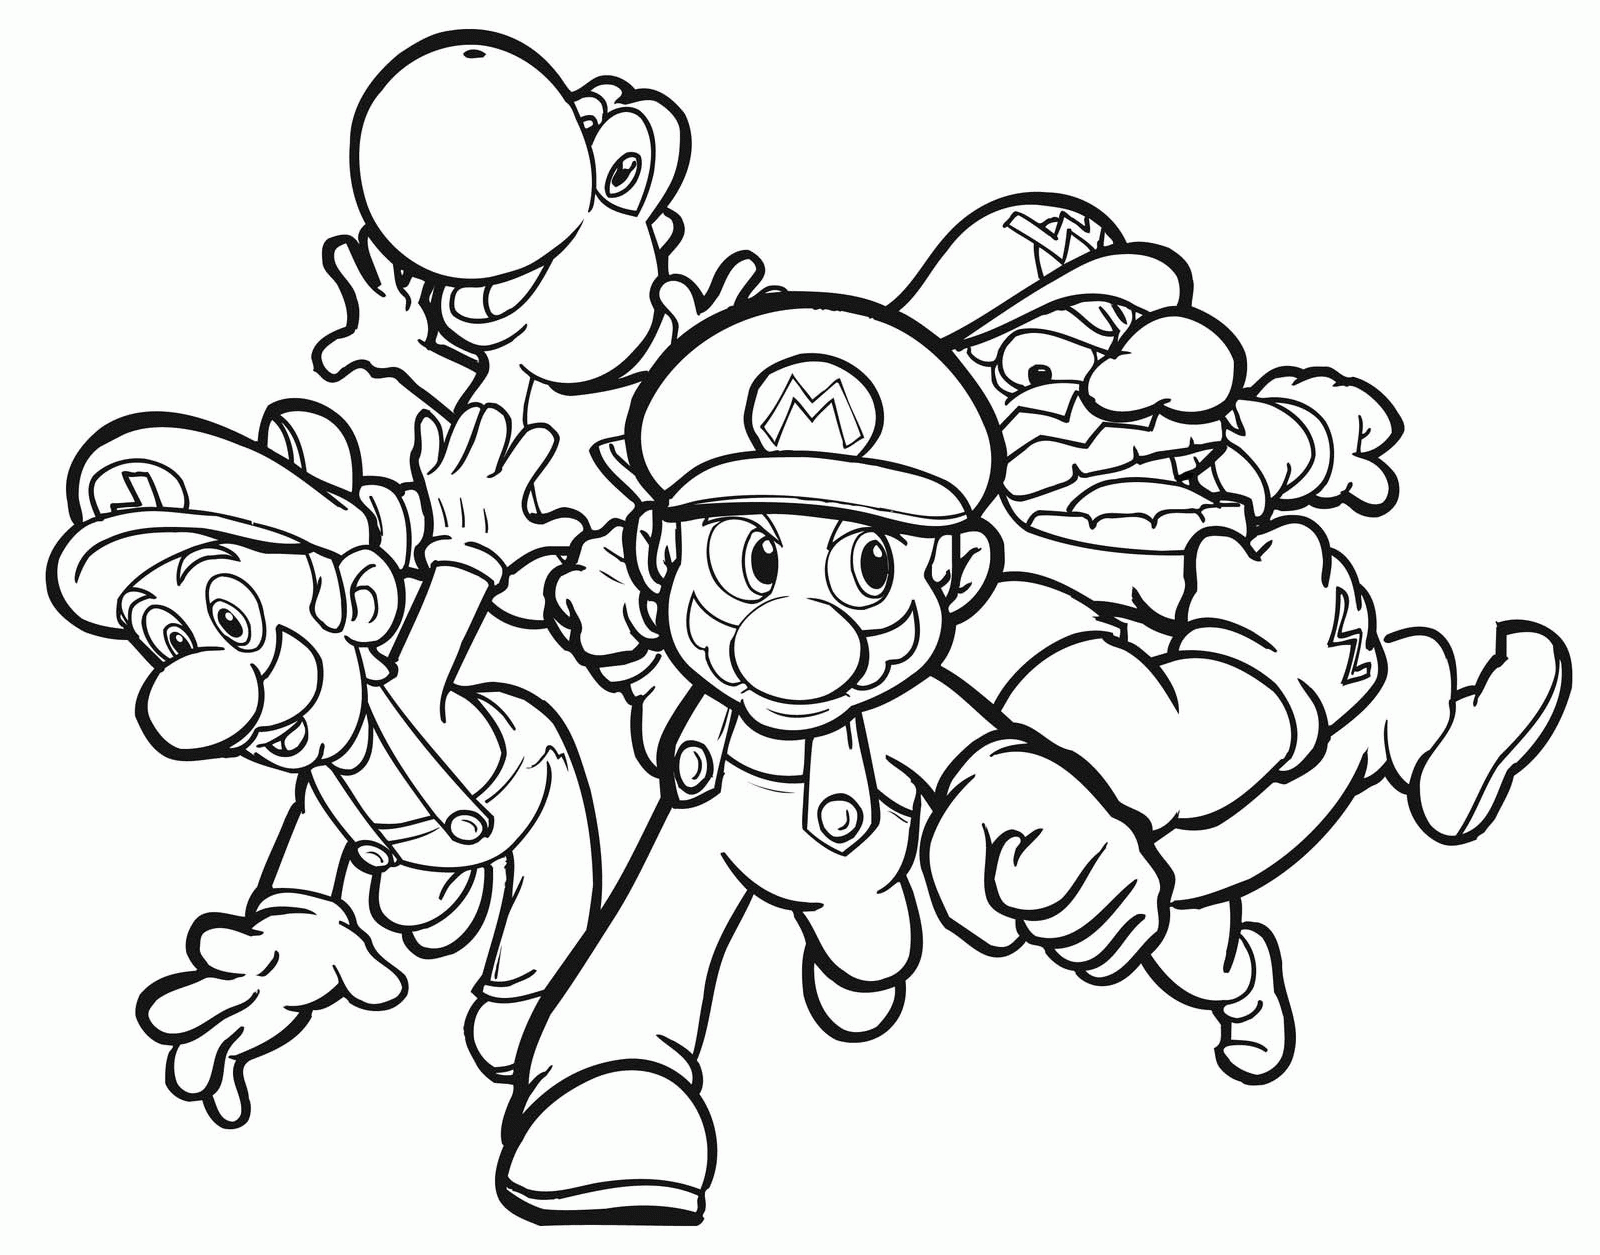 Wario Coloring Pages (11 Pictures) - Colorine.net | 3873